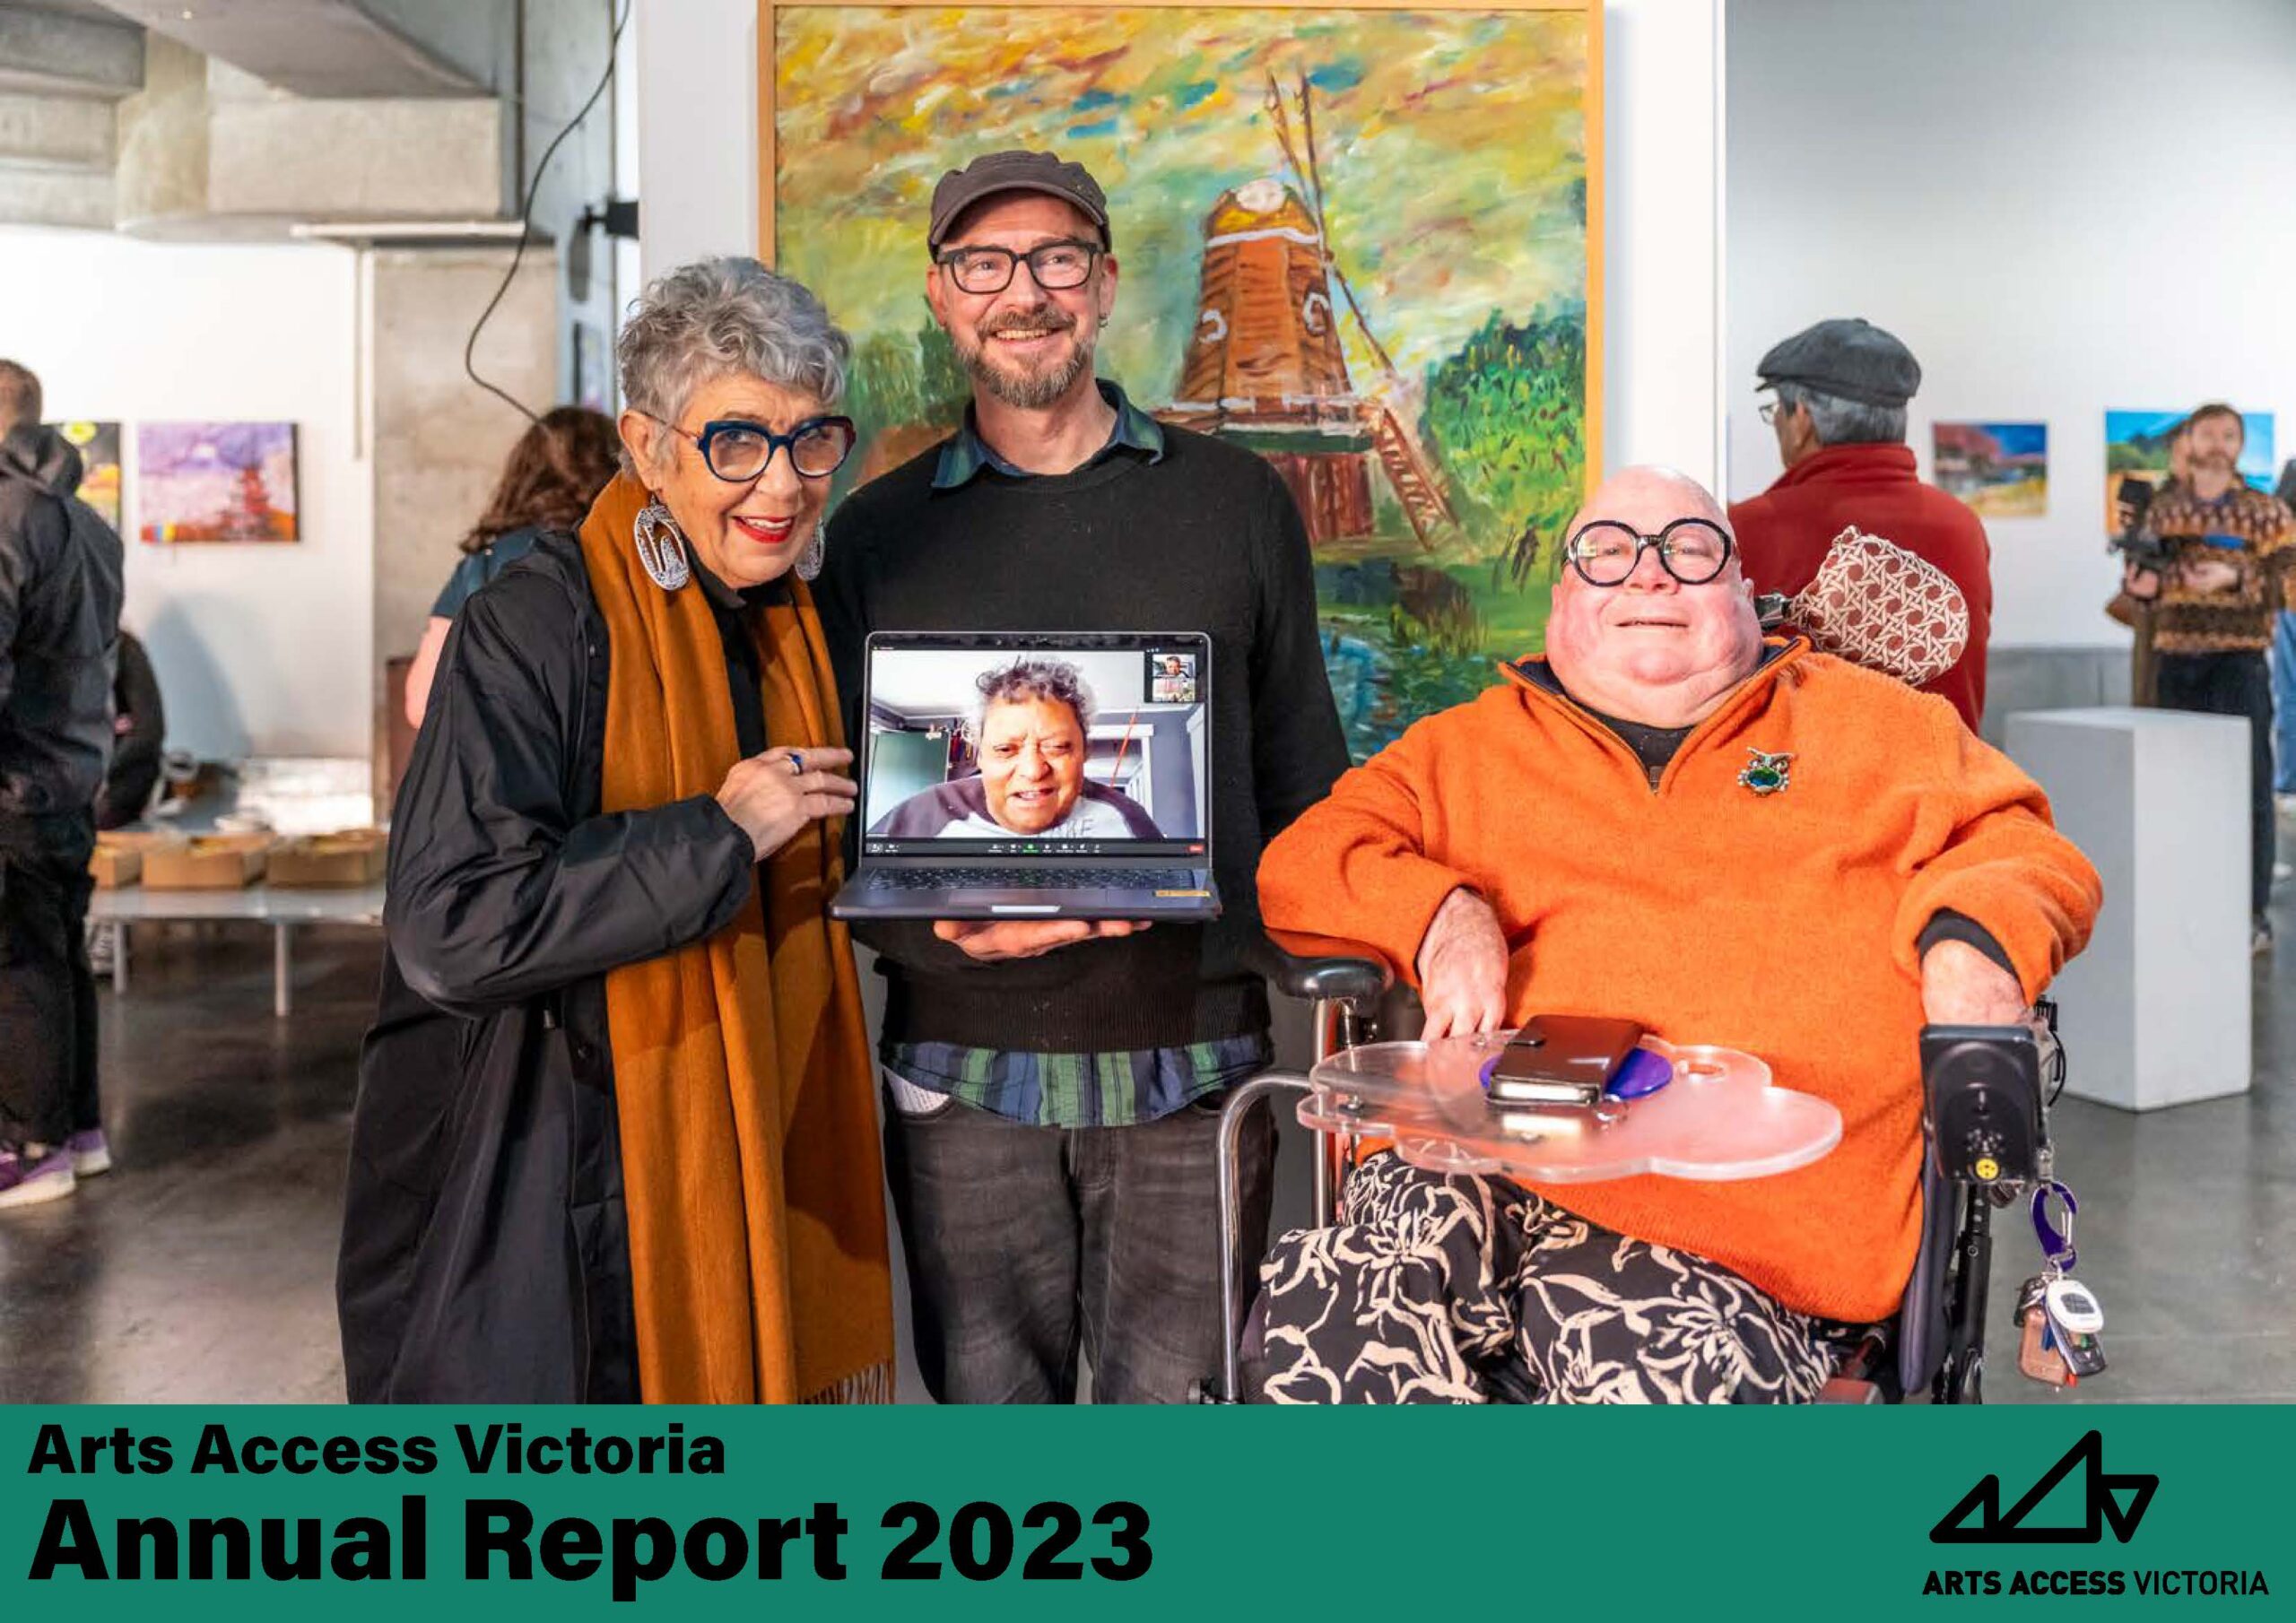 Three people in an art gallery, Aunty N’arweet Carolyn Briggs AM, PJ Noack in front of a lansdscape painting featuring a windmill. Uncle Greg Muir is seen on a laptop held by PJ Noack.